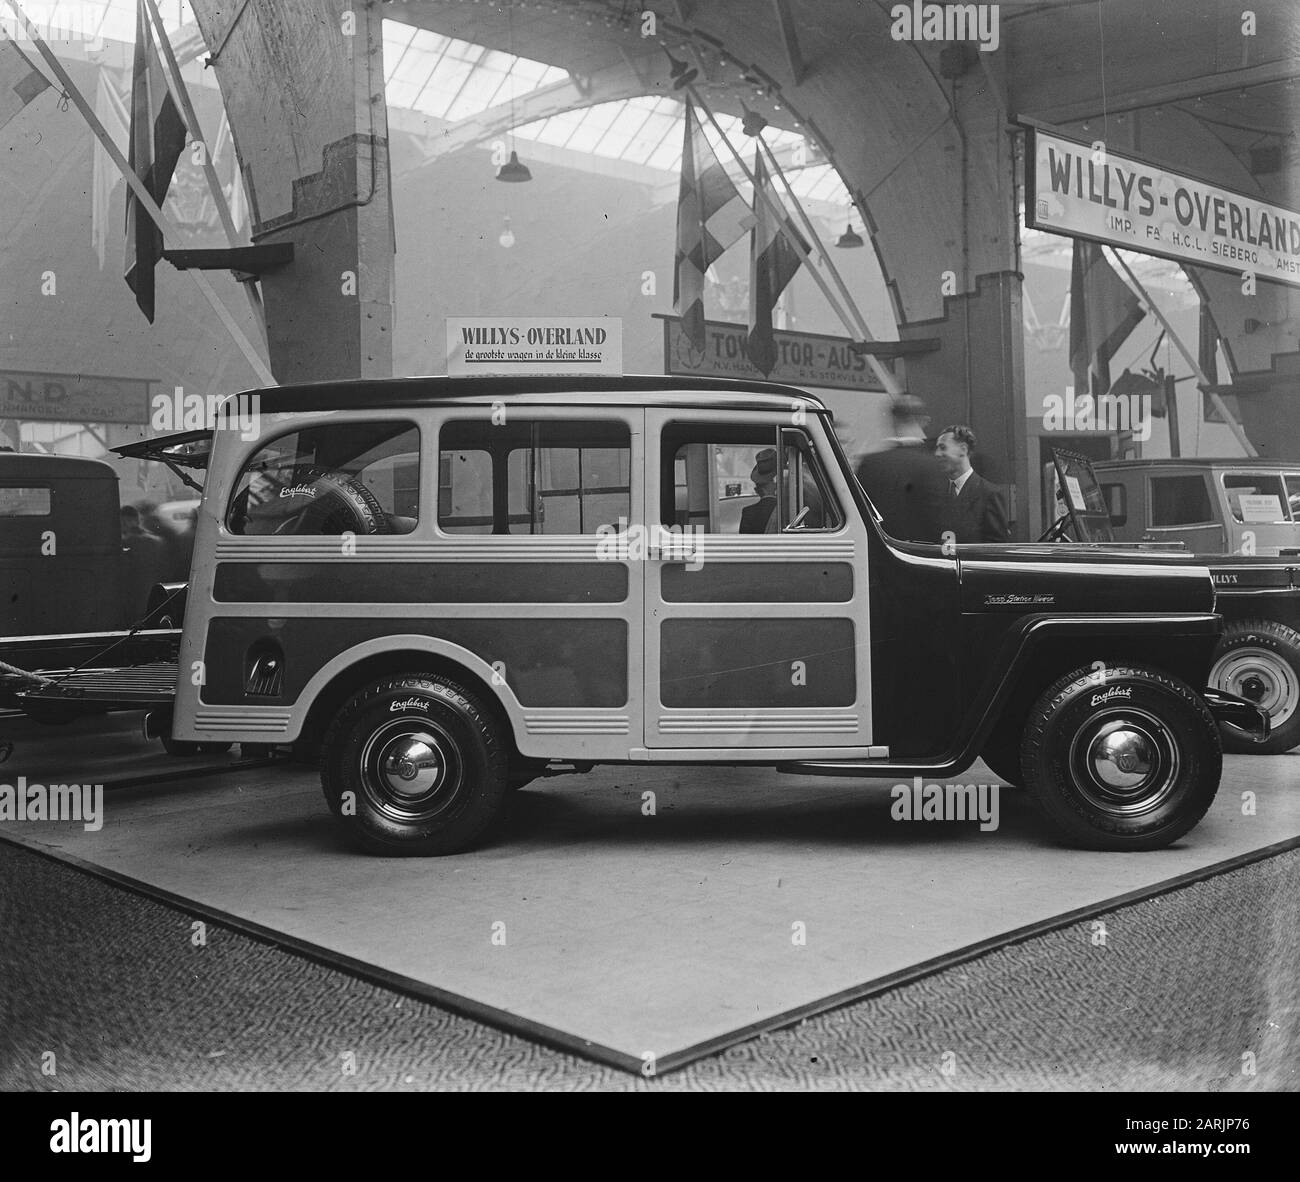 Exhibition RAI. Willys Jeep Station Wagon Date: 2 May 1948 Location: Amsterdam, Noord-Holland Keywords: cars, car exhibitions Institution name: RAI Stock Photo